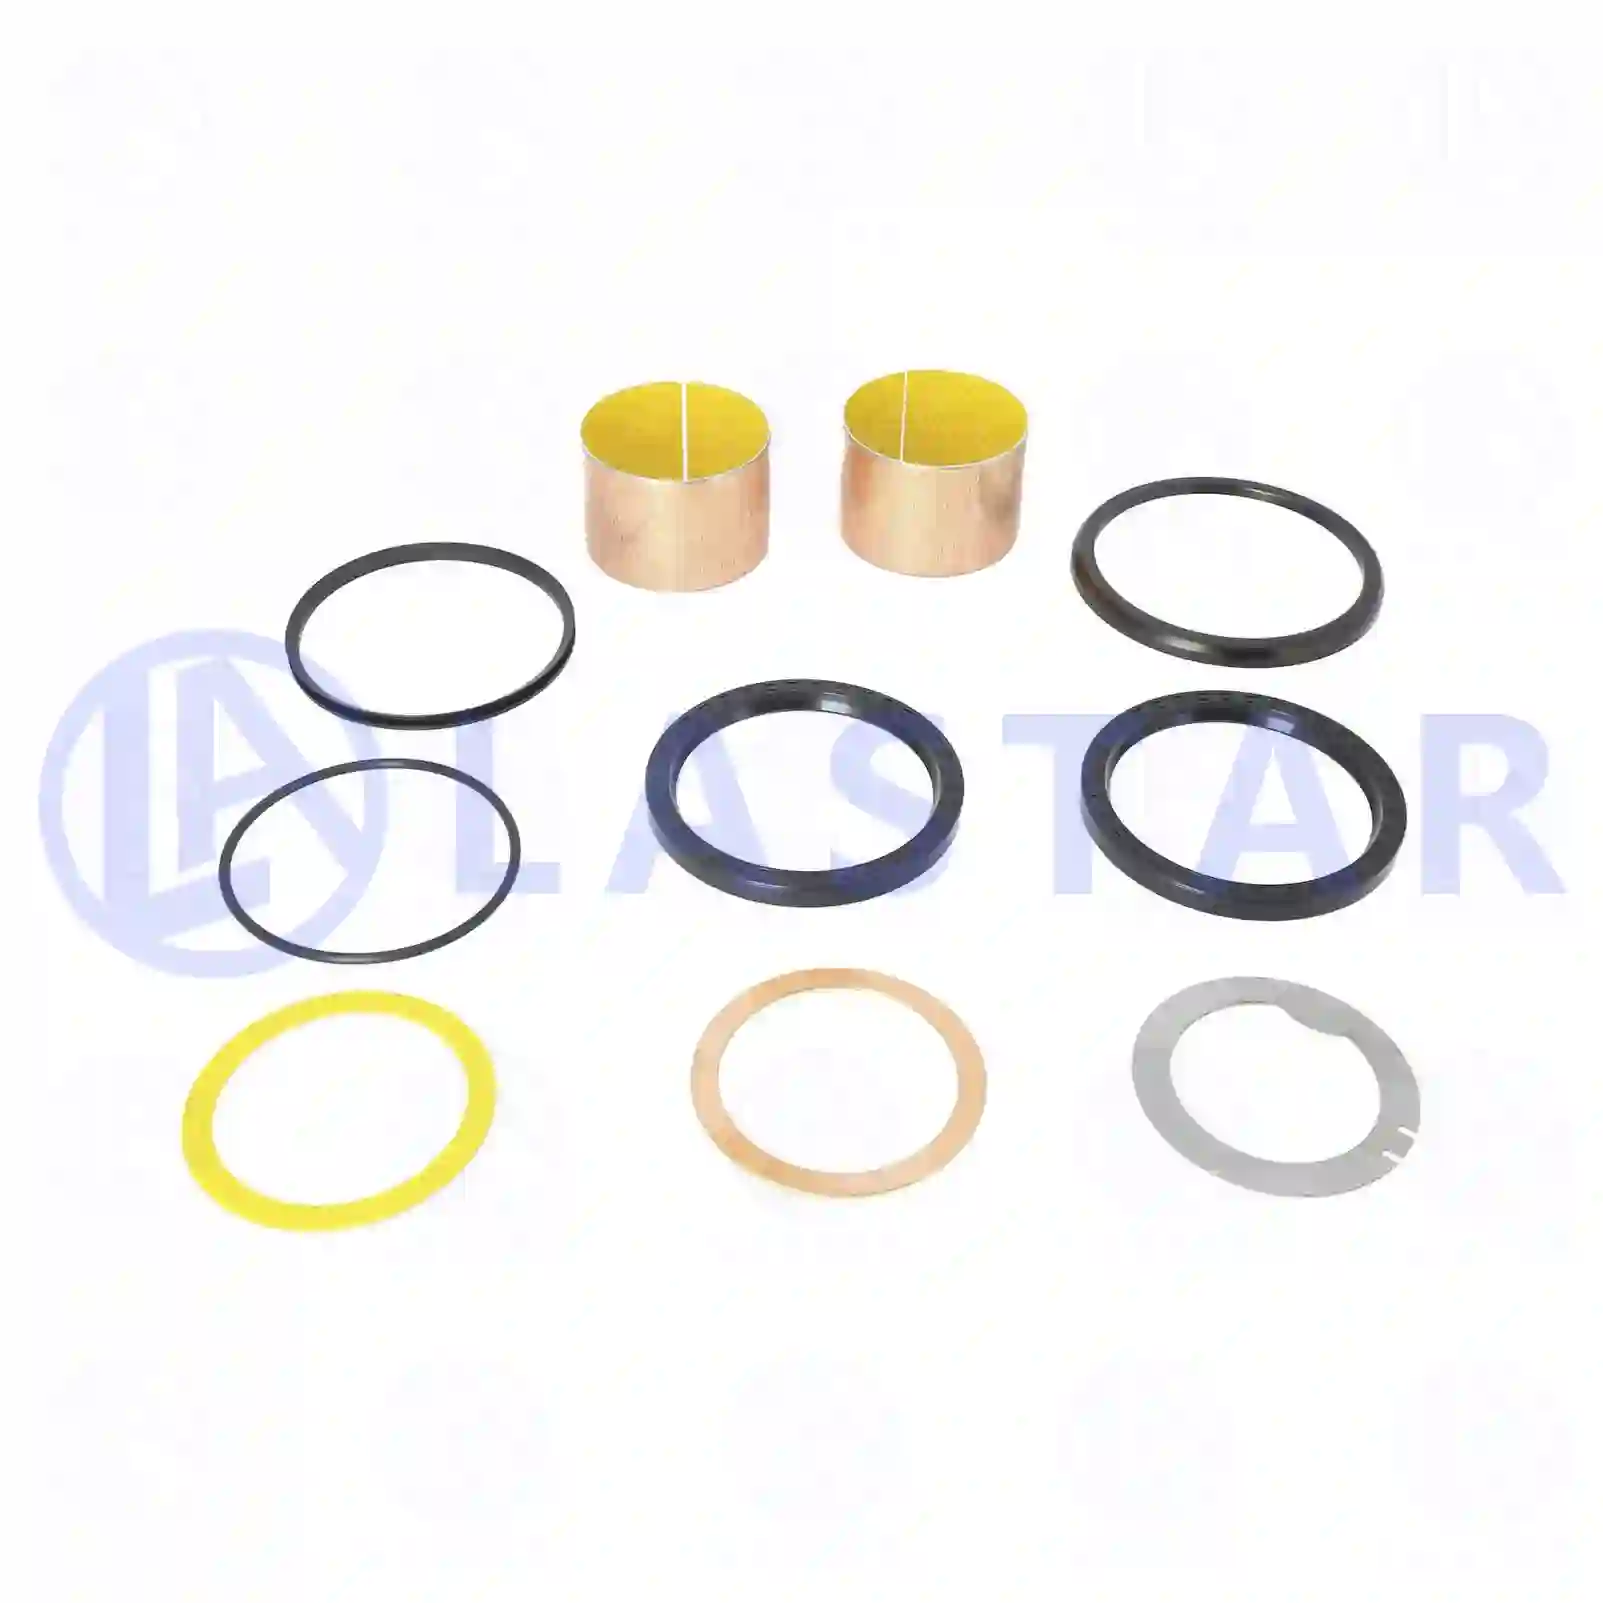 Repair kit, spring saddle, without grease nipple, 77727517, 2262363 ||  77727517 Lastar Spare Part | Truck Spare Parts, Auotomotive Spare Parts Repair kit, spring saddle, without grease nipple, 77727517, 2262363 ||  77727517 Lastar Spare Part | Truck Spare Parts, Auotomotive Spare Parts